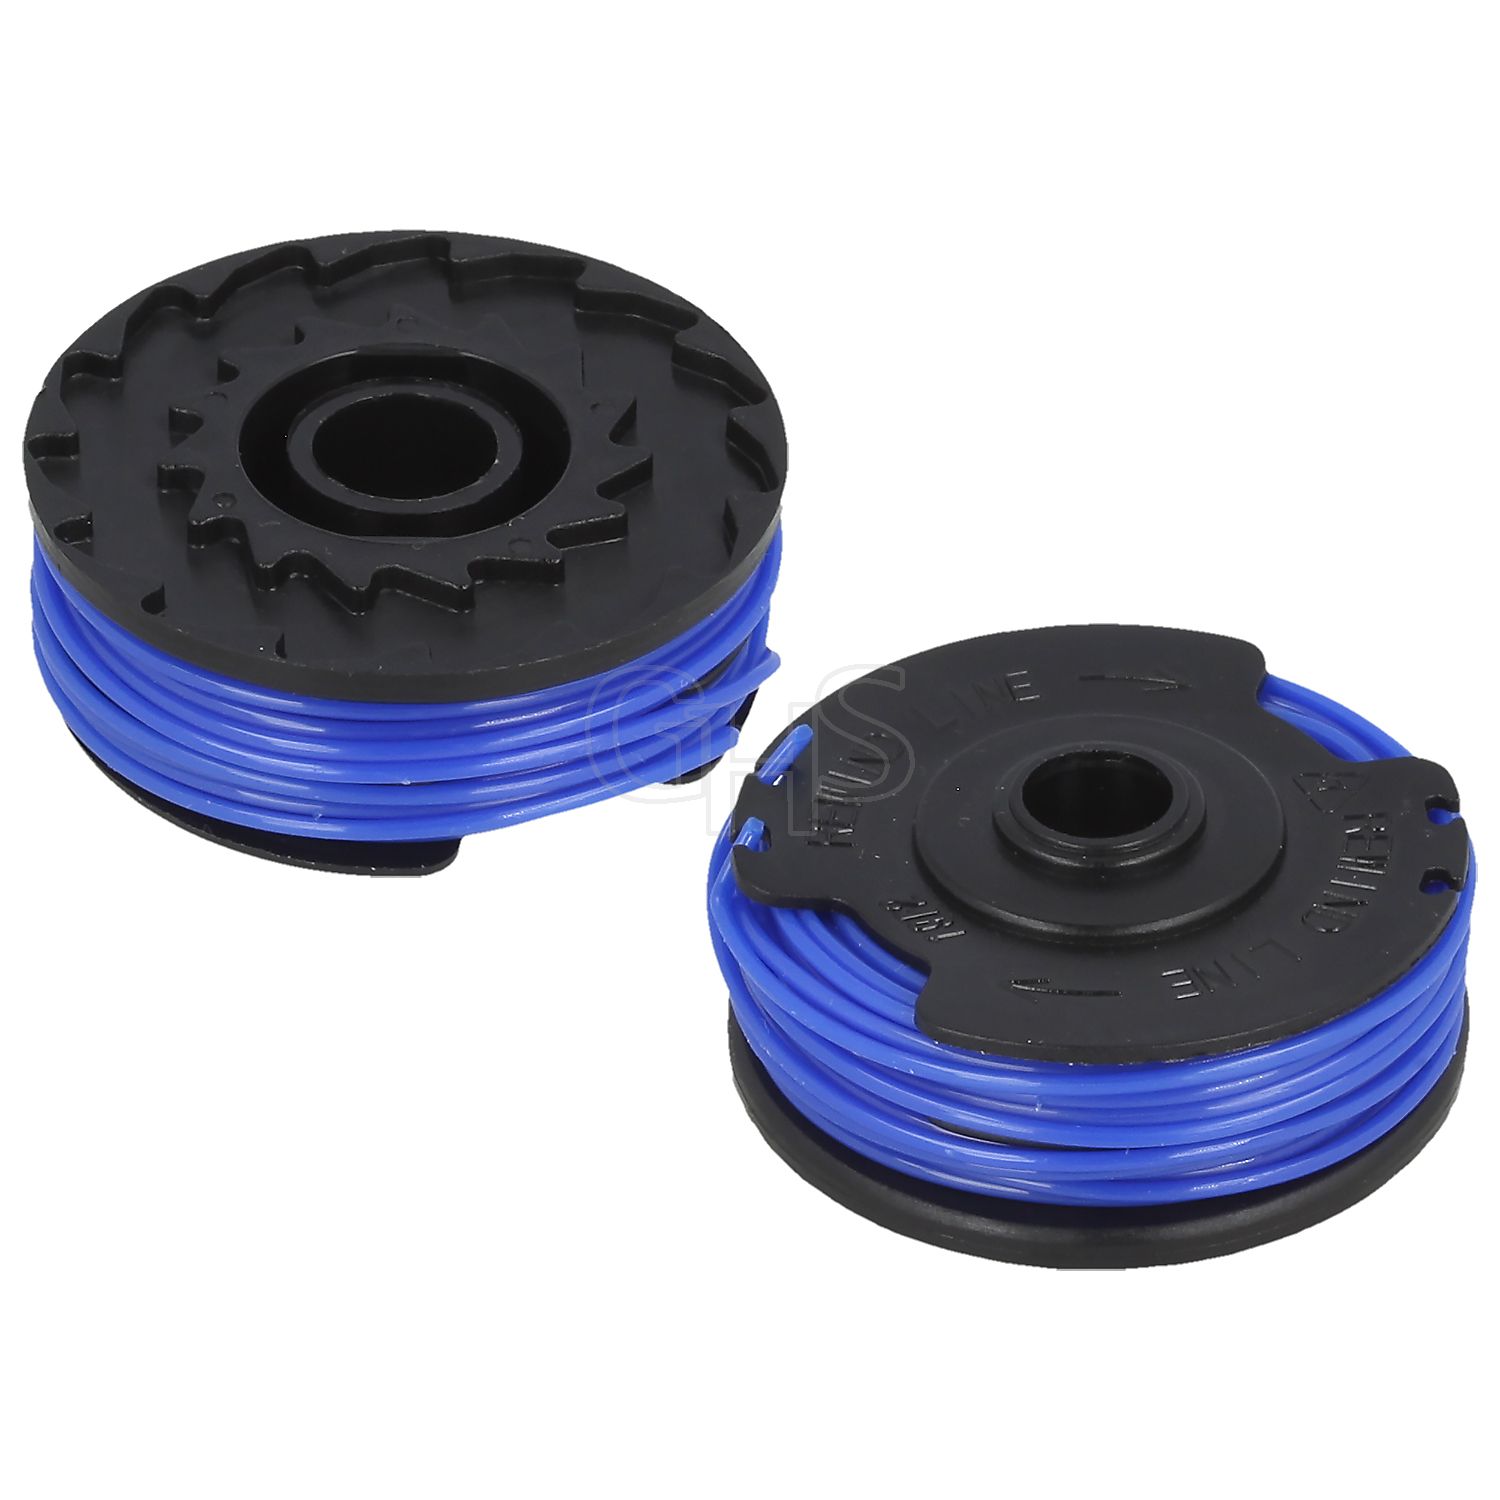 Multi-Trim 250, 300, Strimmer Spool & Line, Pack of 2 - 513 93 71-90 | Garden Hire Spares